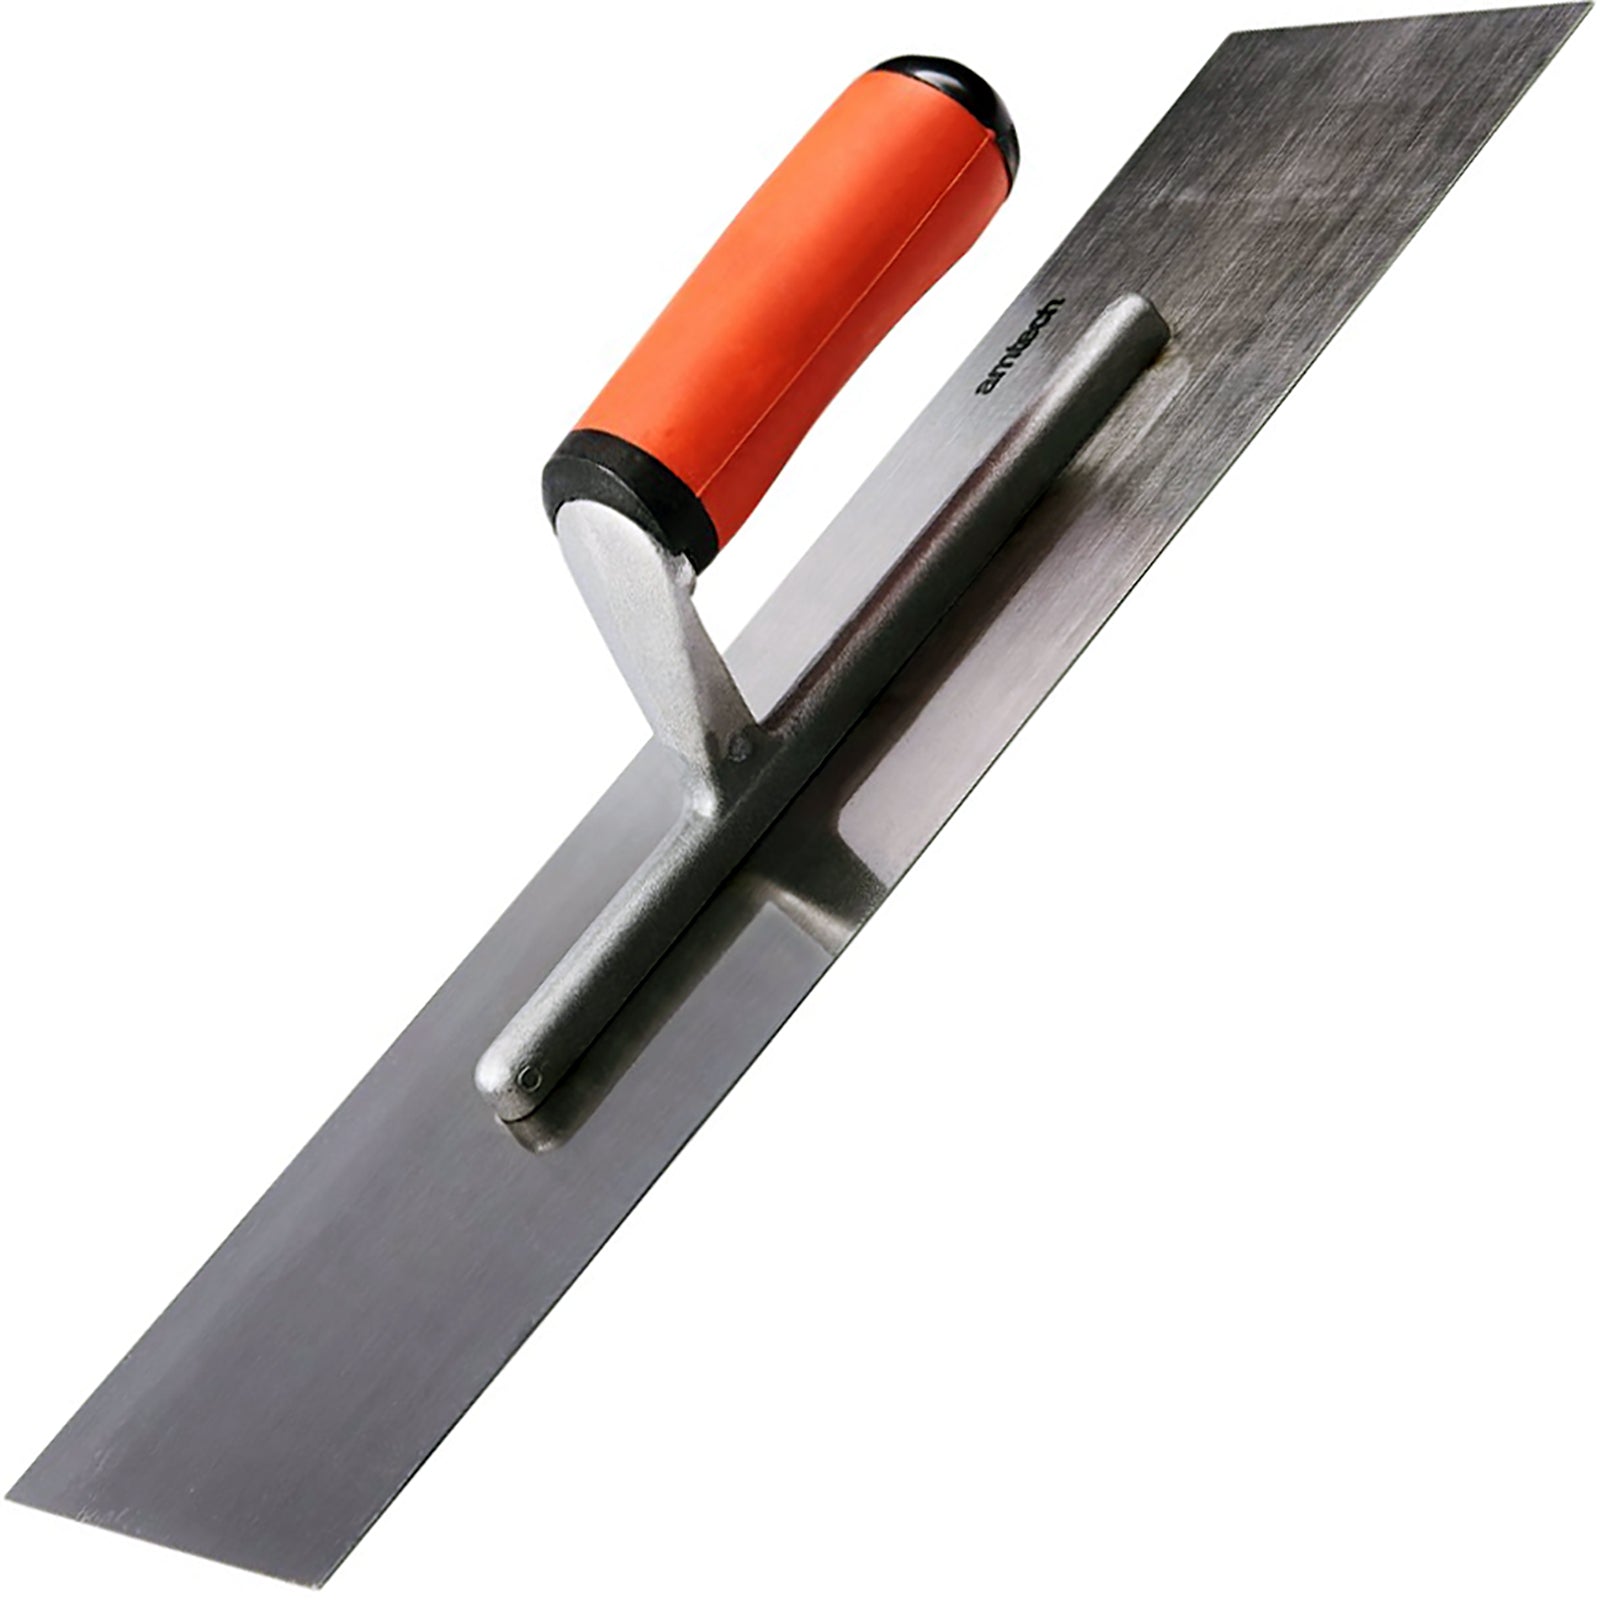 Amtech 400mm (16") Cement Trowel with Soft Grip Handle